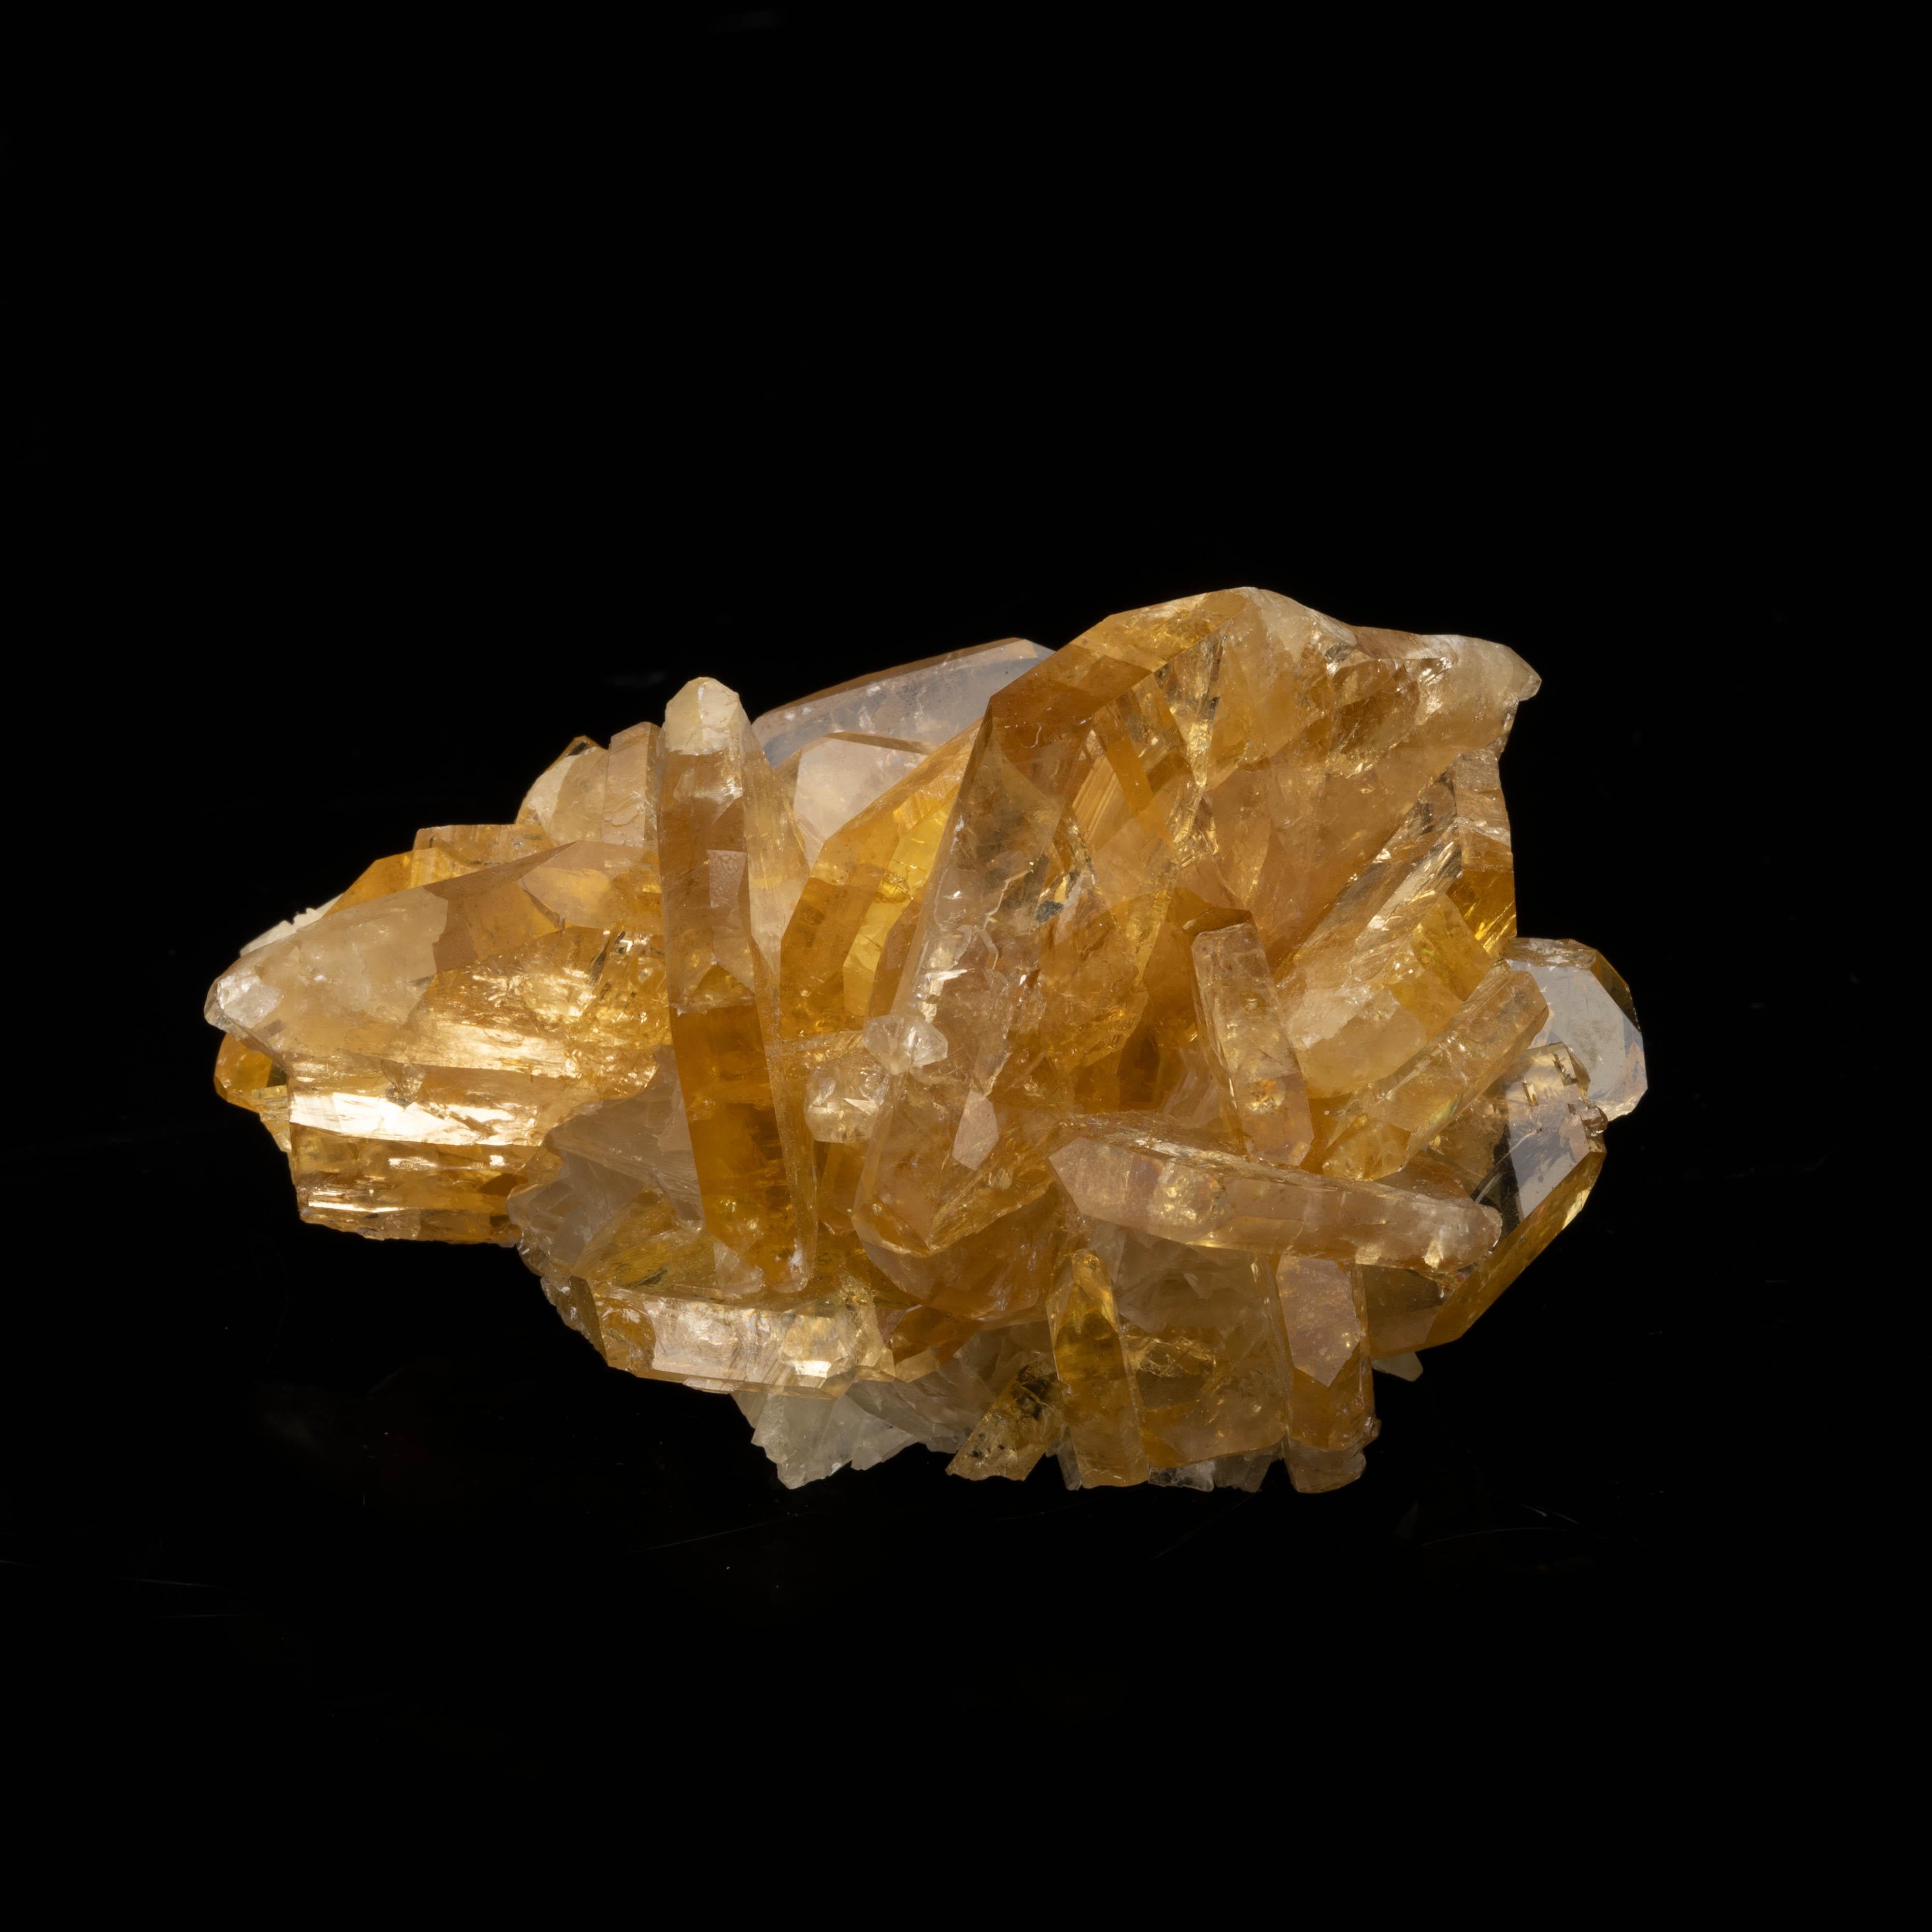 From Nevada's Meikle Mine, this excellent quality golden barite features stellar translucency and harbors rainbows. This cluster of lustrous and fully formed tabular-rhombohedron crystals displays a beautiful amber hue. A handsome